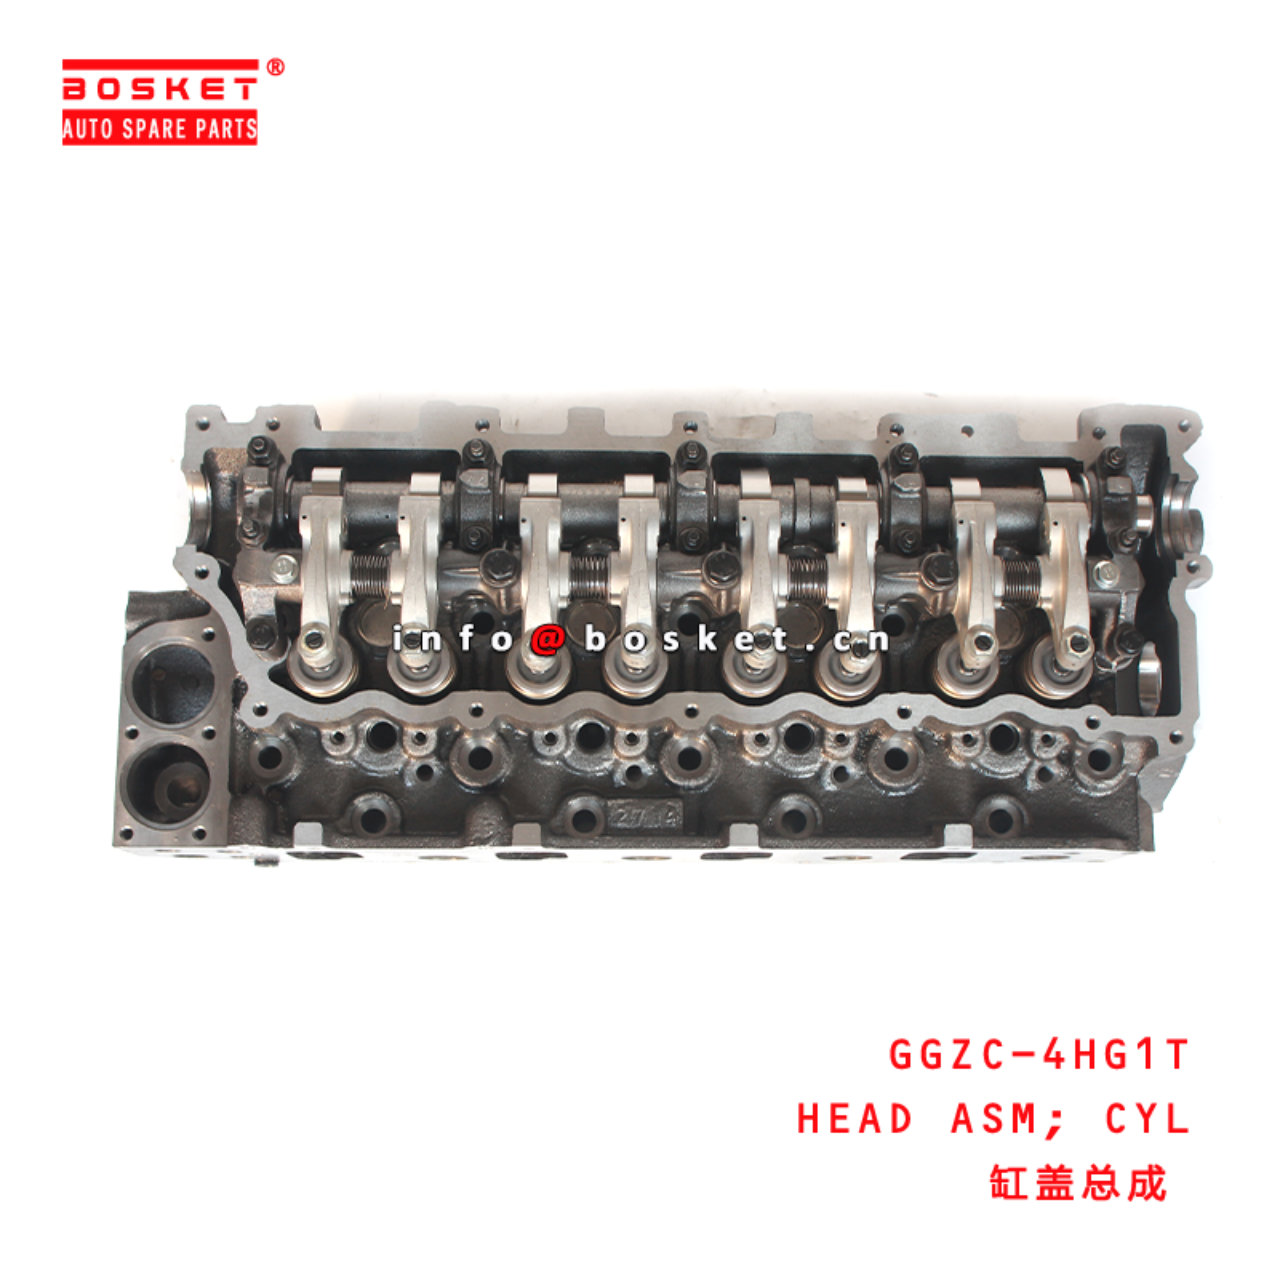 GGZC-4HG1T Cylinder Head Assembly suitable for ISUZU 4HG1T GGZC 4HG1T